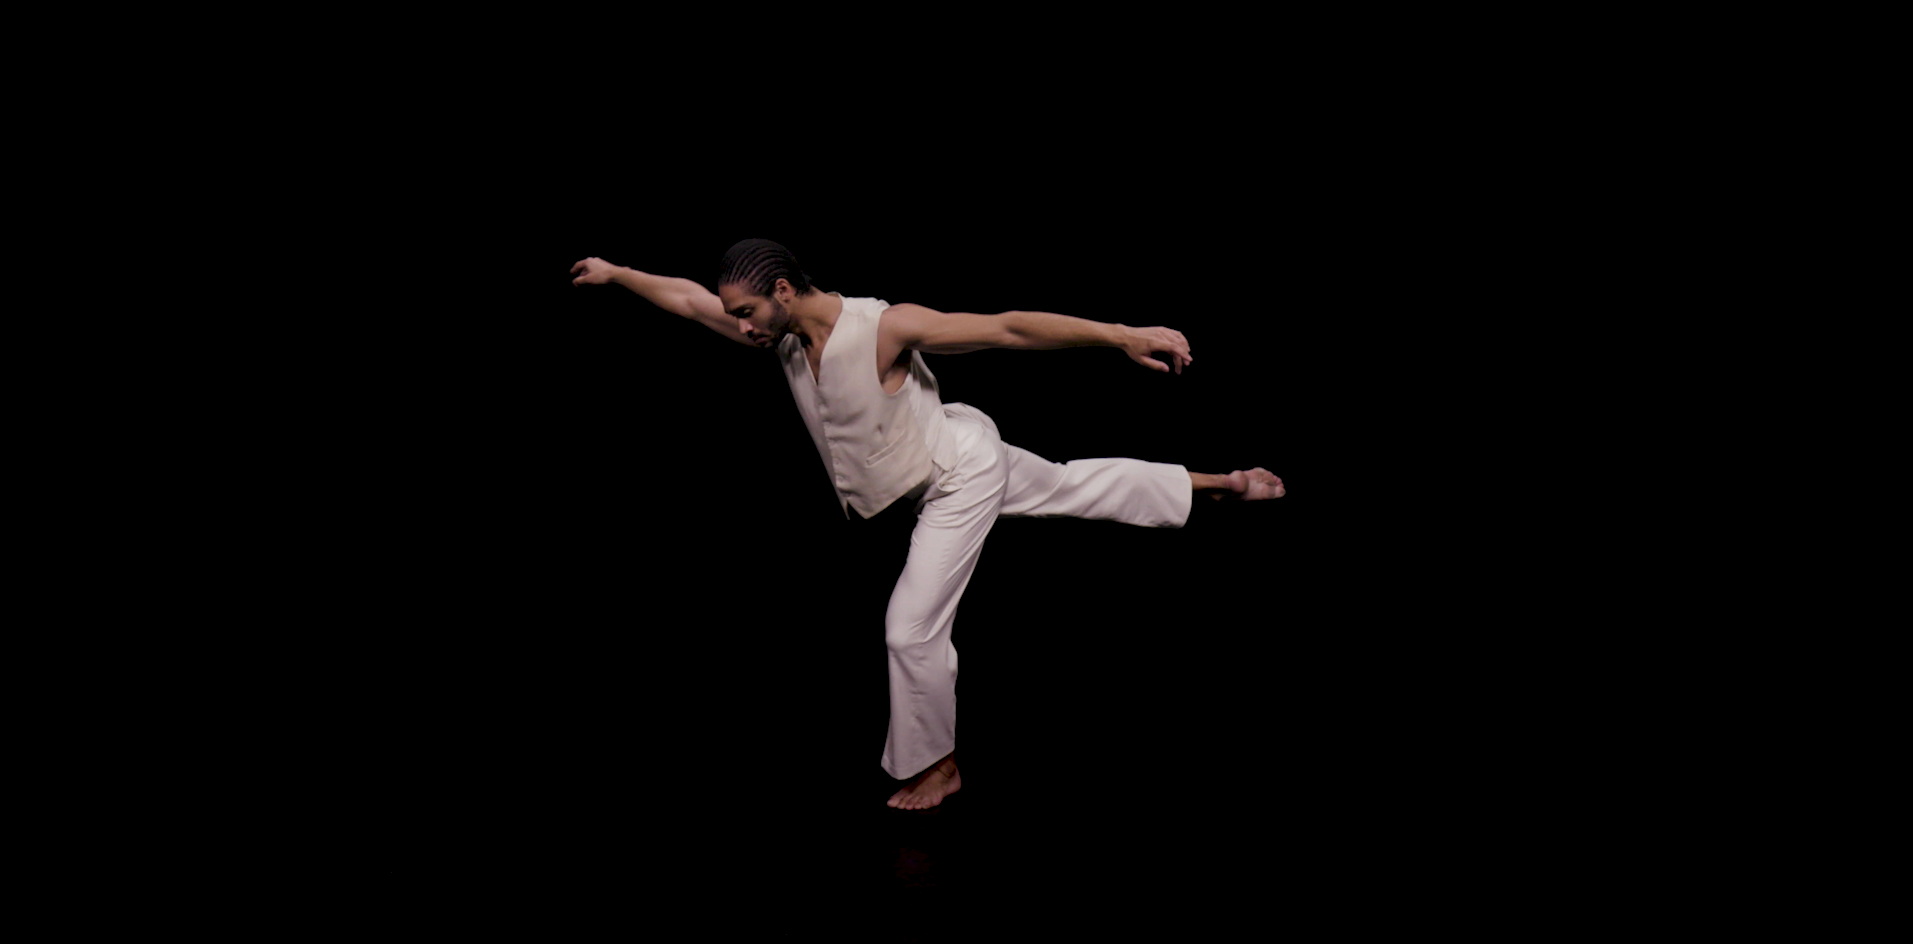 This image displays dancer Harry against a black background with one leg in the air, one arm in front of him and one arm behind him. He is balancing on on leg.